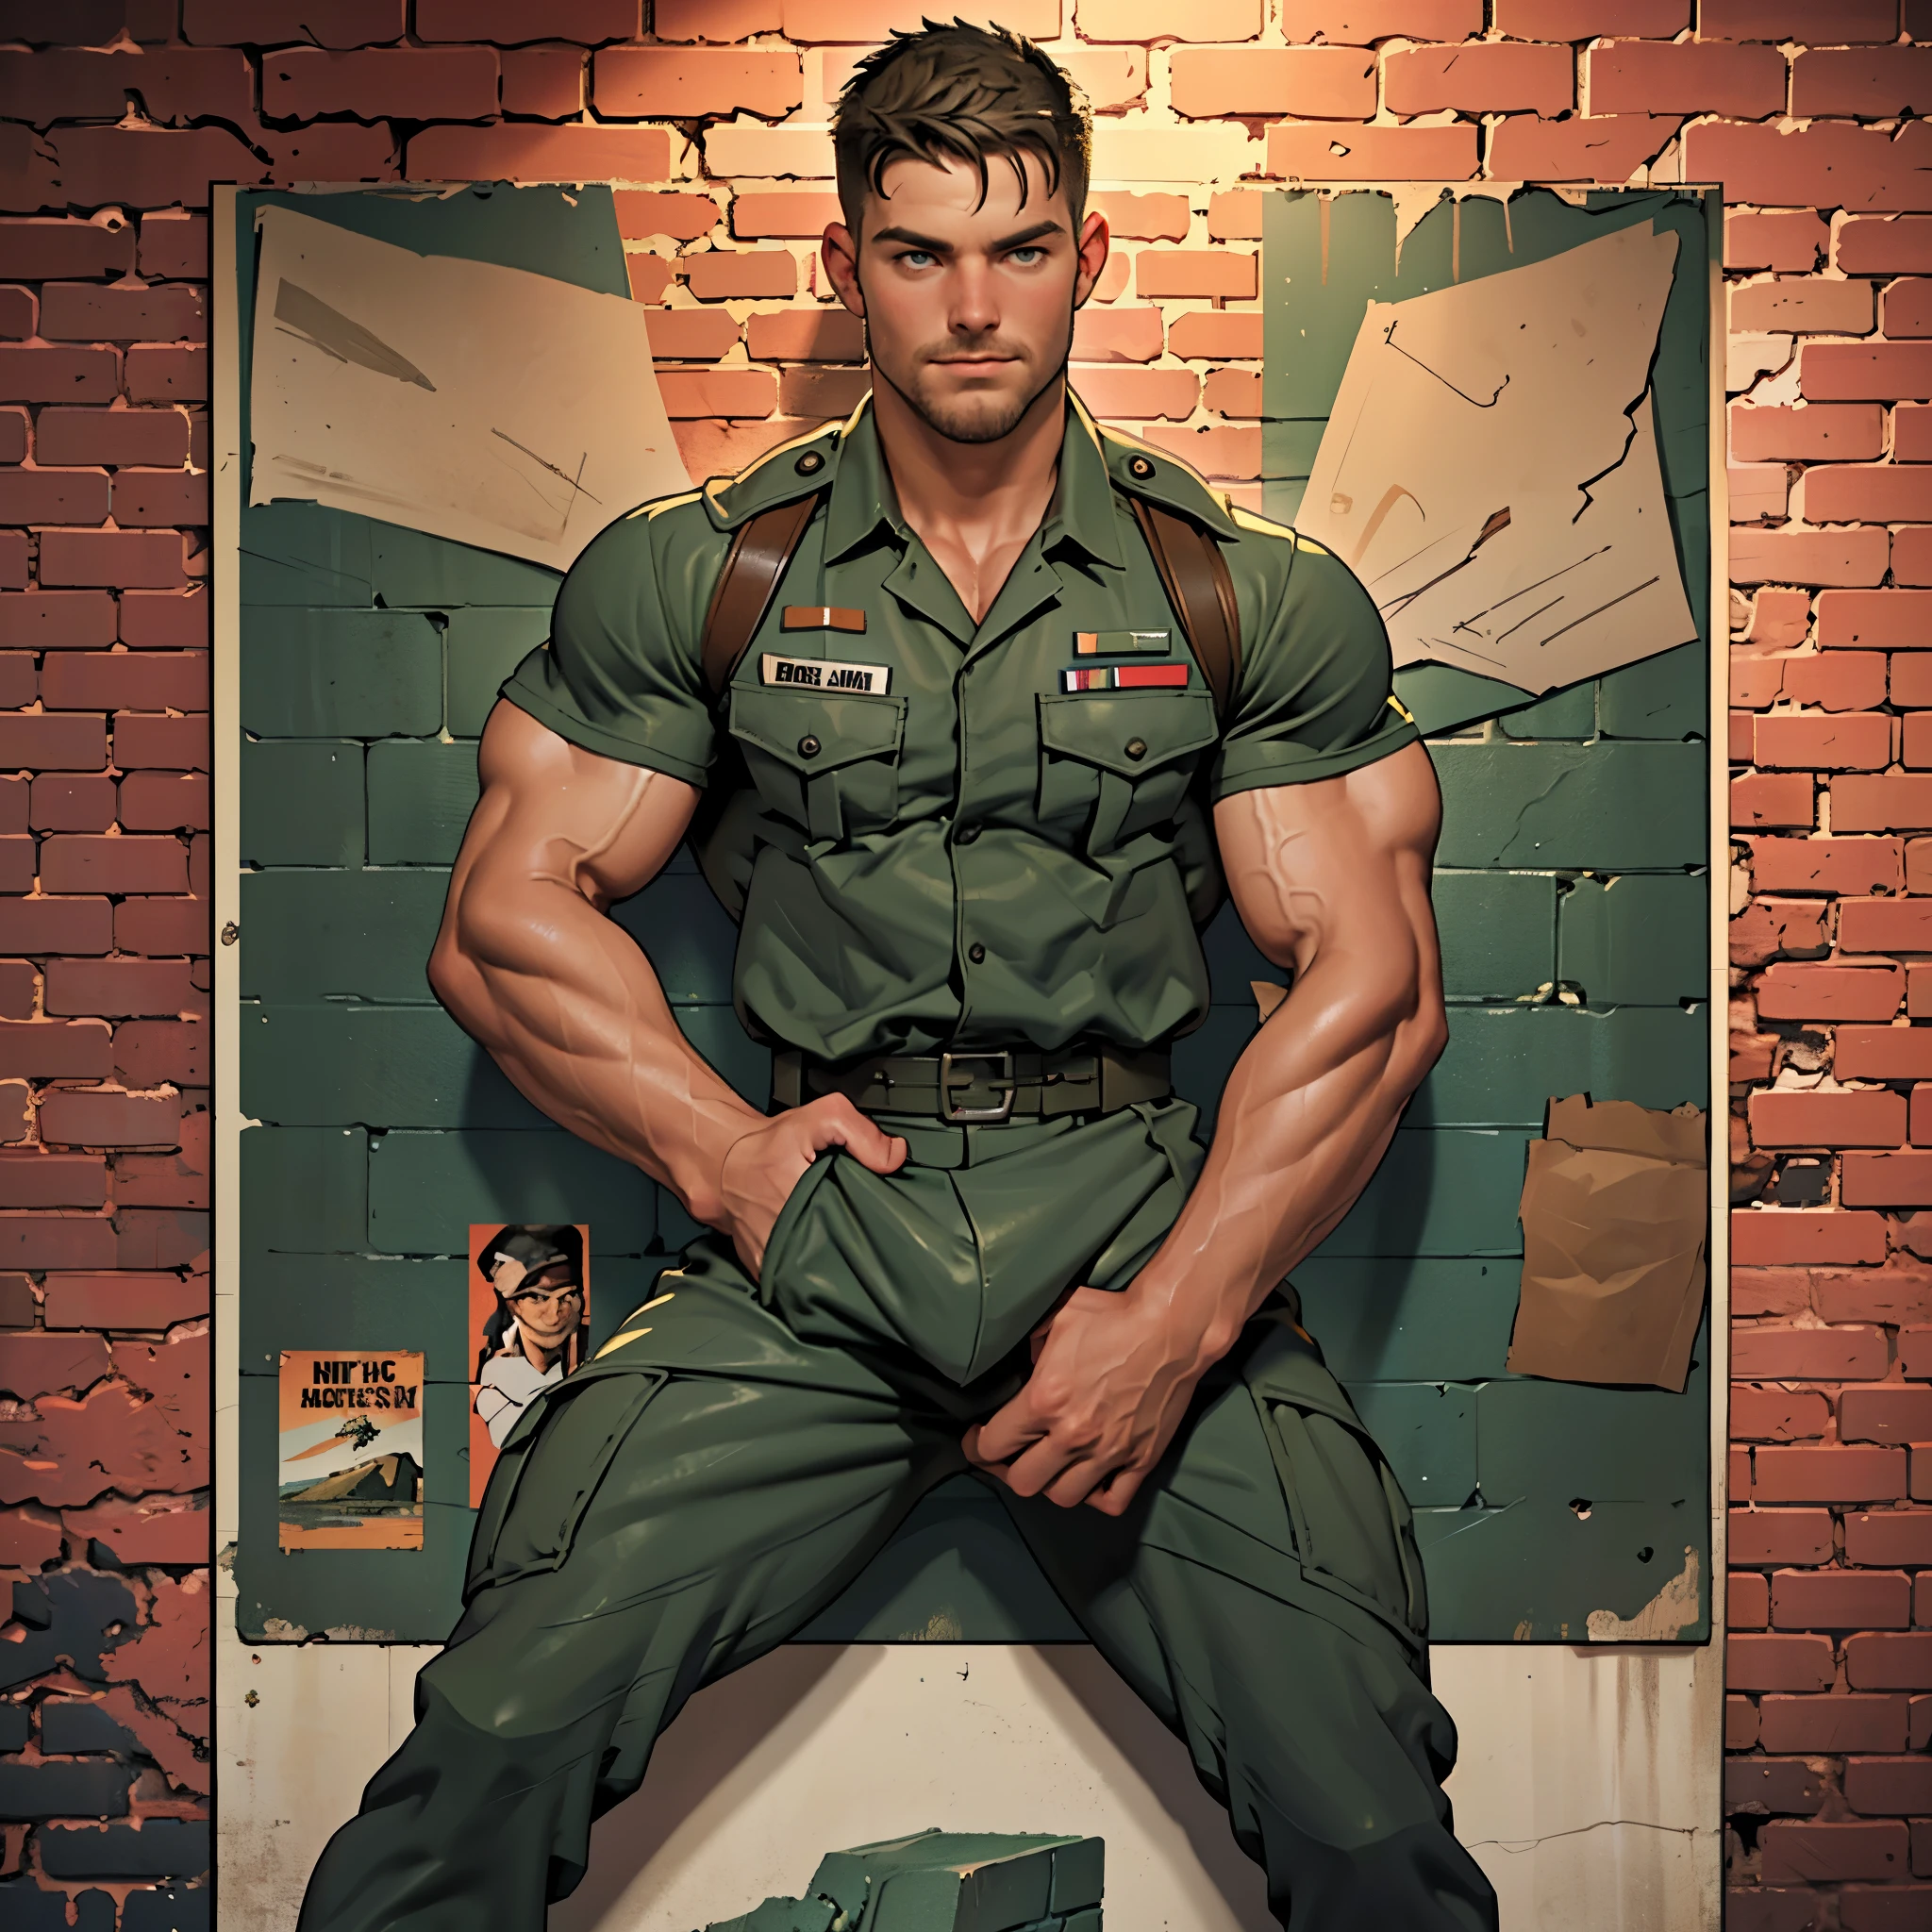 32k, high quality , detailed face , detailed hands , detailed muscles , stephen amell standing and  posing  as a military man ,standing with spread legs, showing his muscles and bulge , ((background brick wall with lot of army posters ))